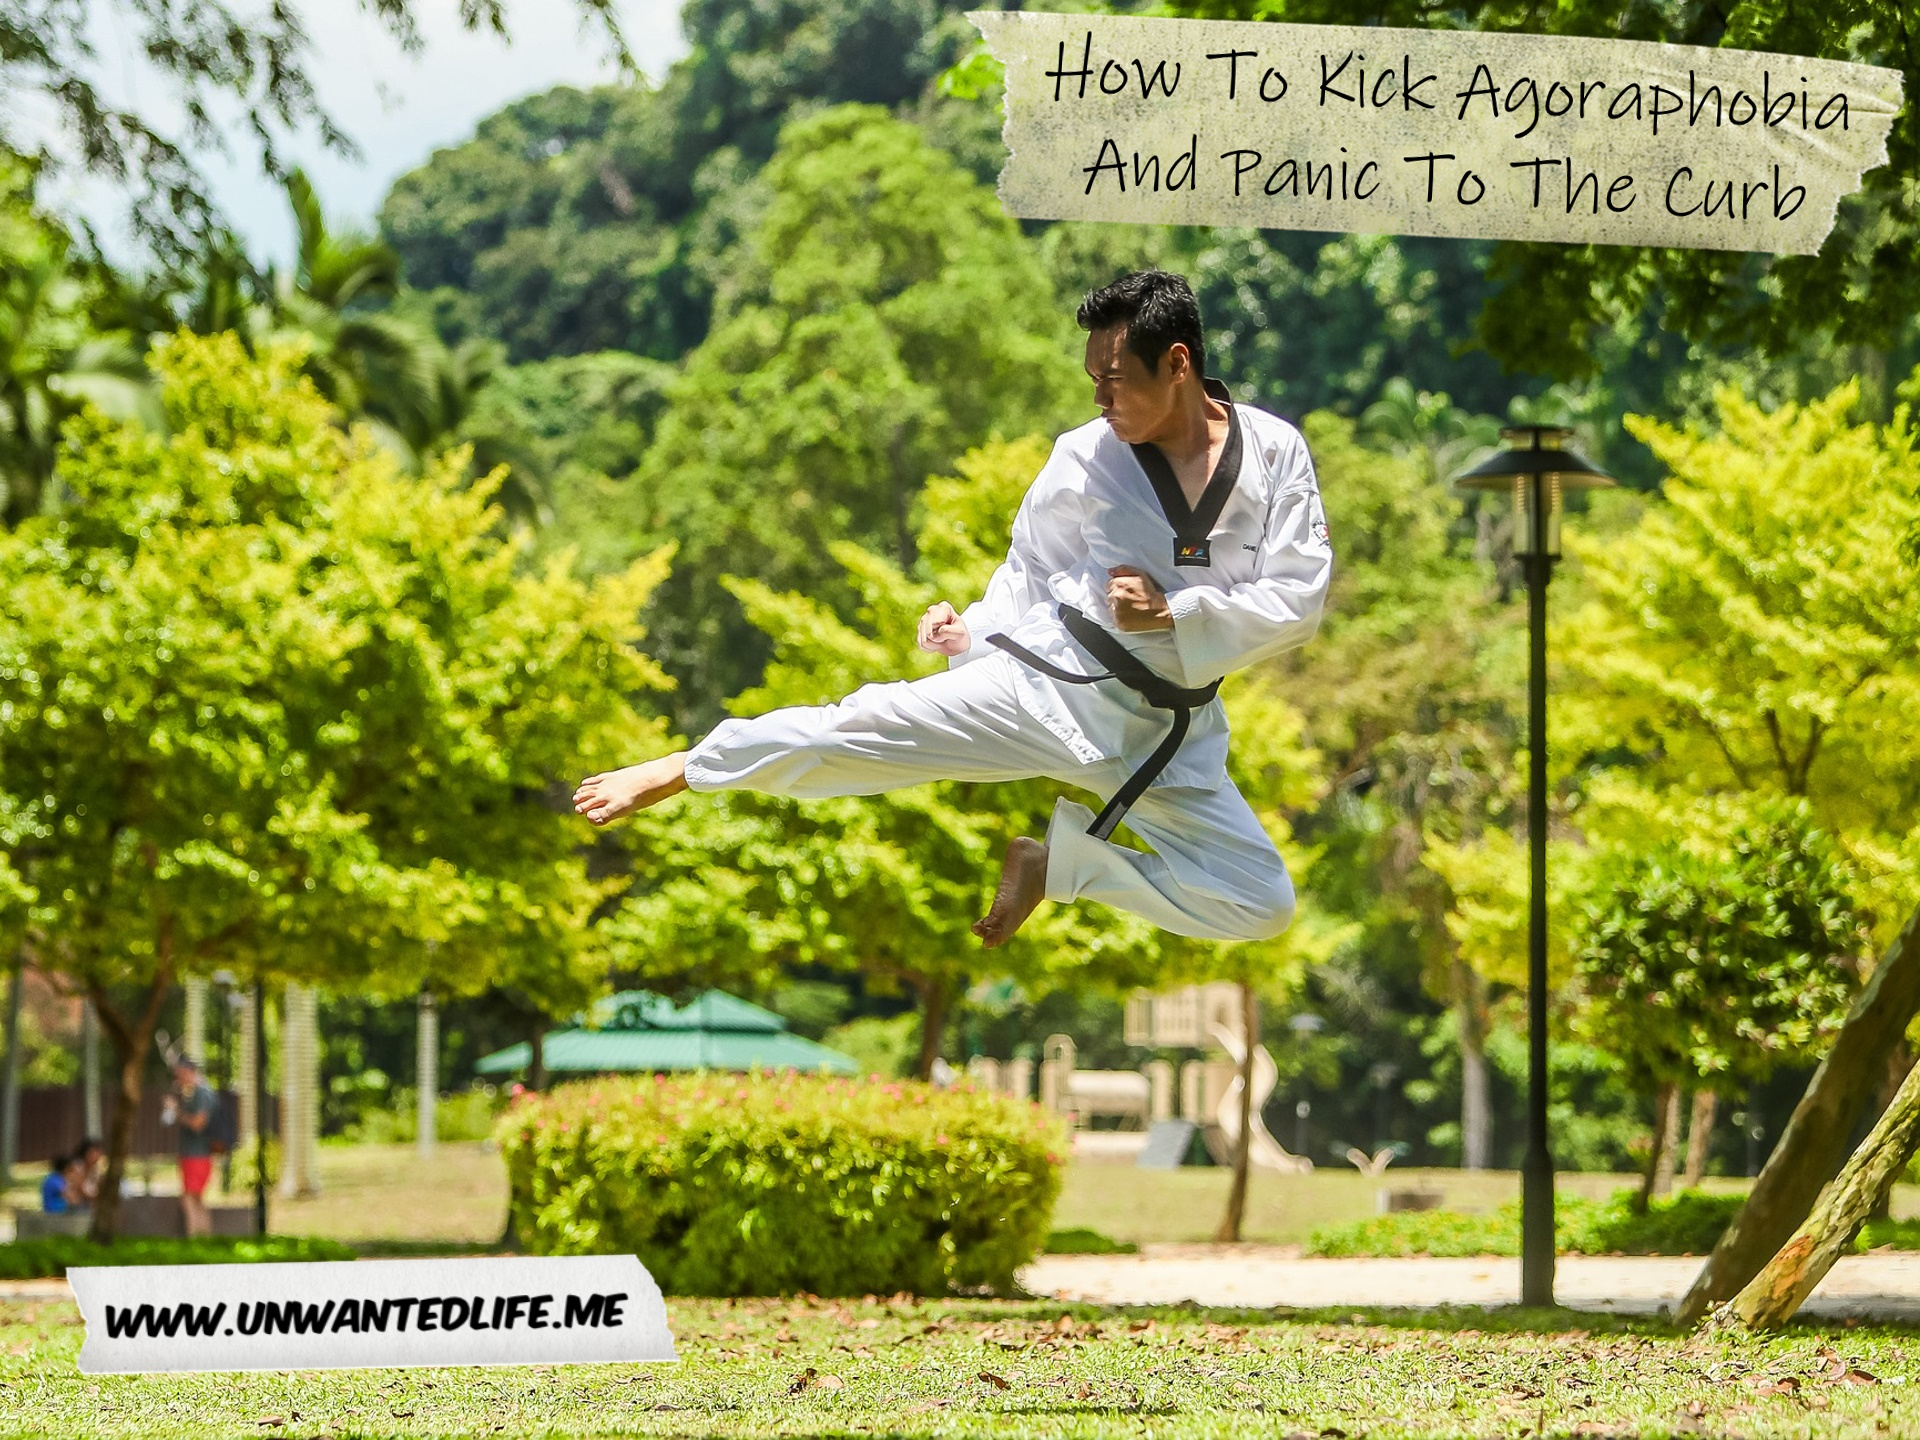 A photo of an Asian man in a martial art uniform doing a flying kick in a park to represent the topic of the article - How To Kick Agoraphobia And Panic To The Curb